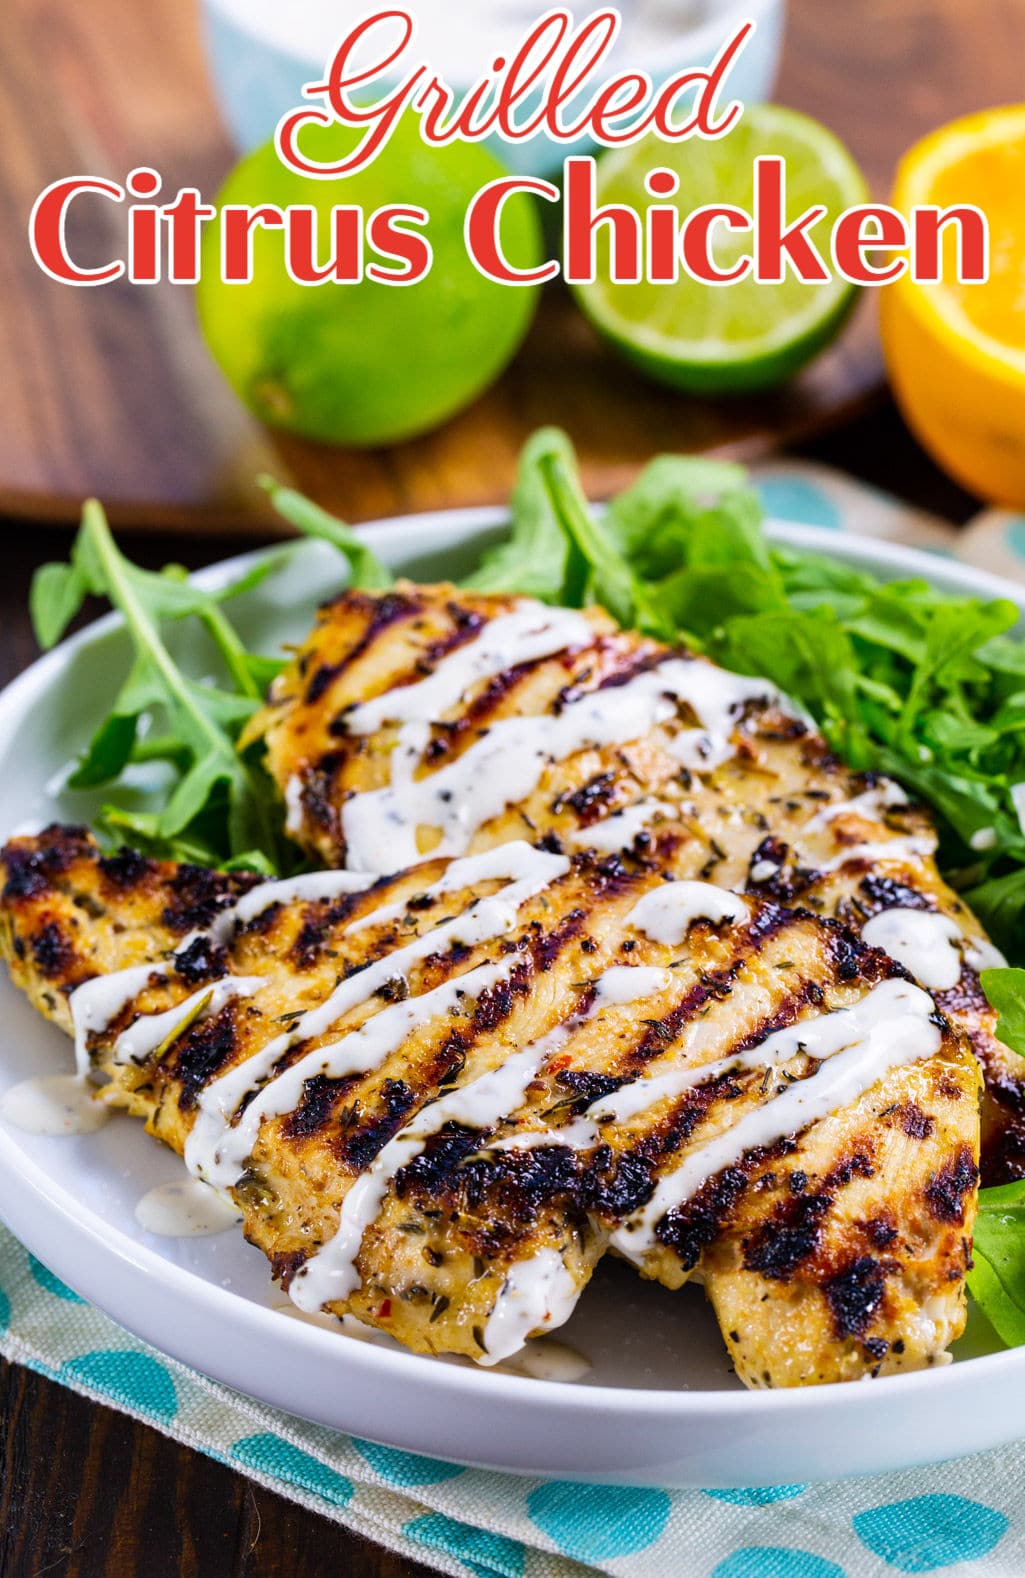 Grilled Citrus Chicken drizzled with white sauce.